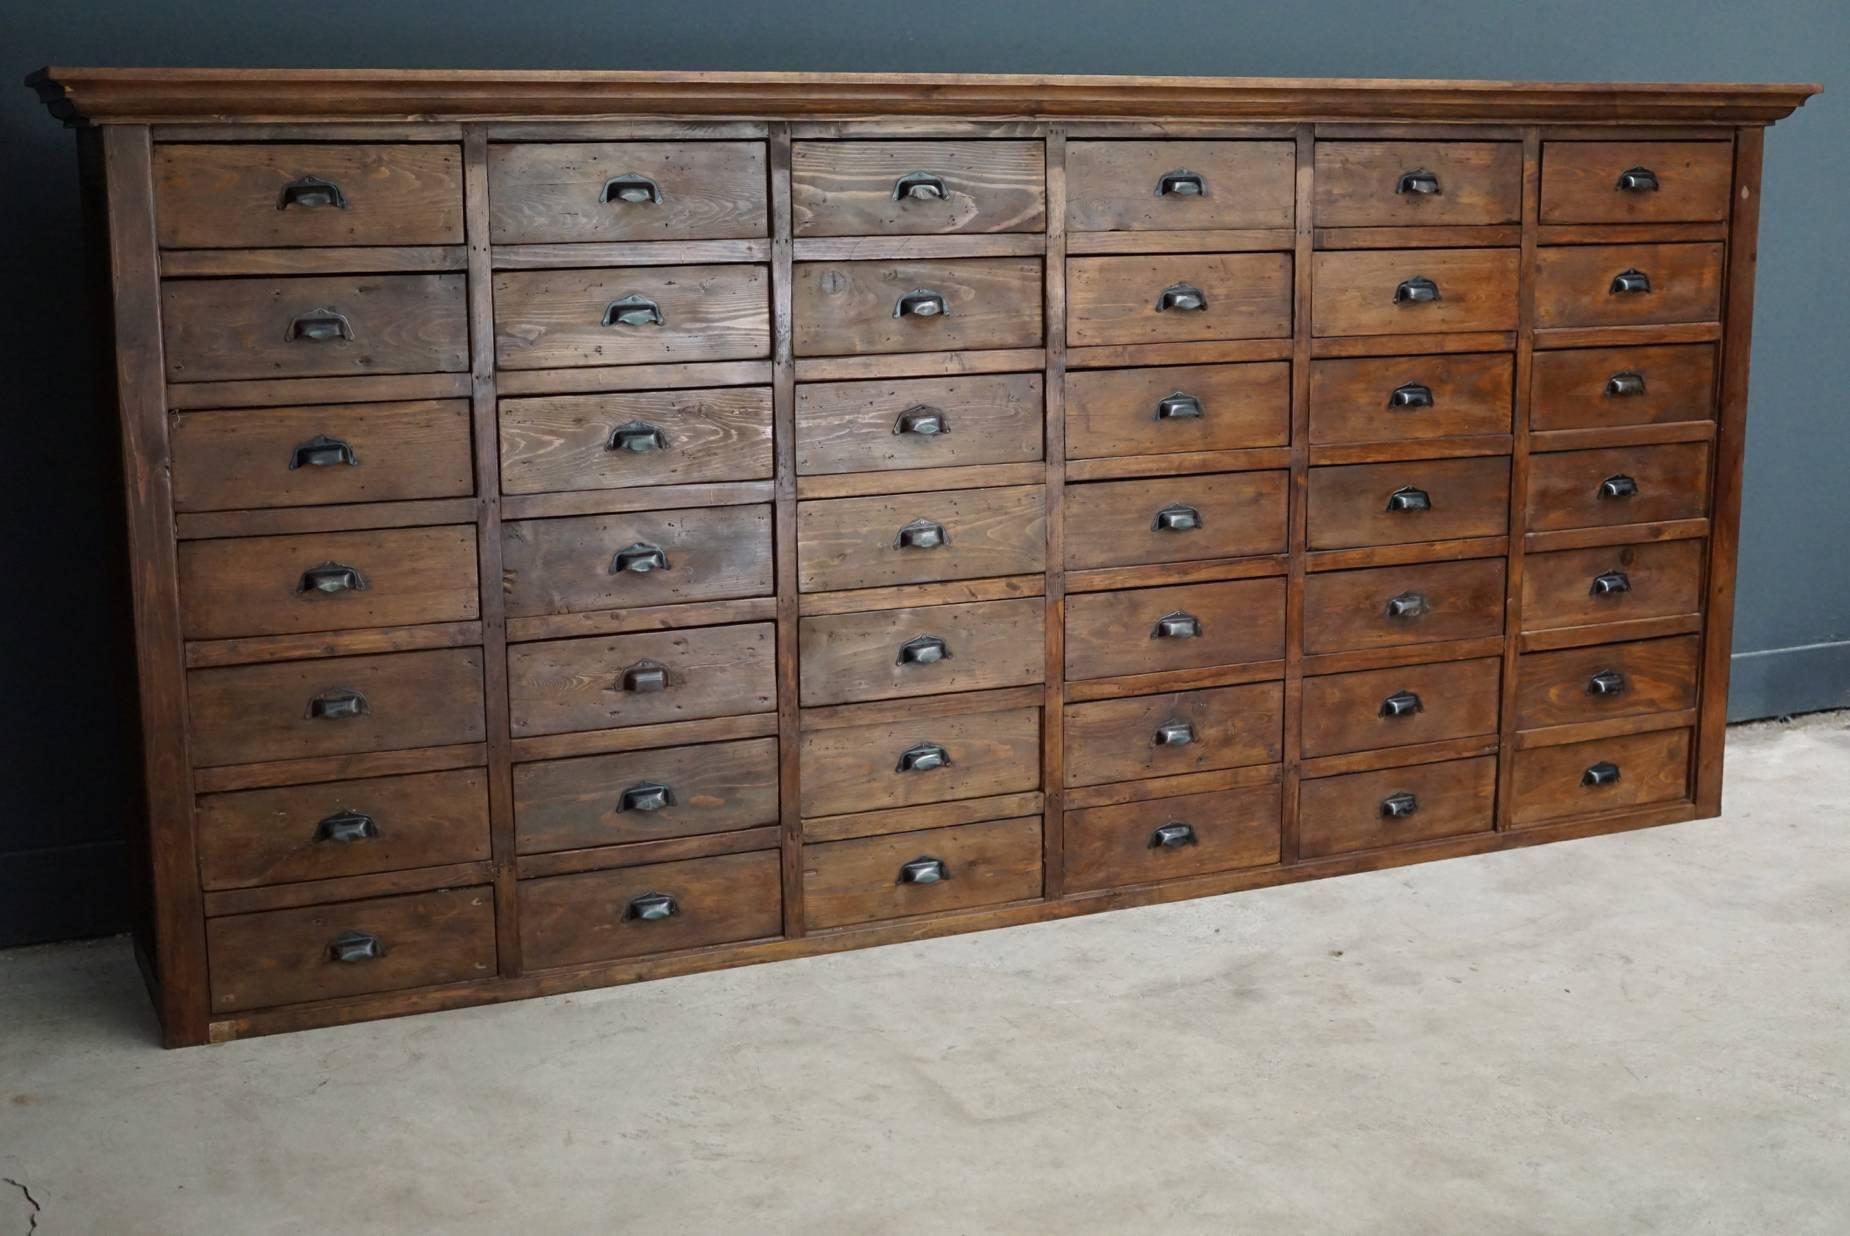 This apothecary cabinet of drawers was designed and made circa 1950s in France. The piece is made from pine and features 42 drawers with metal cup handles.